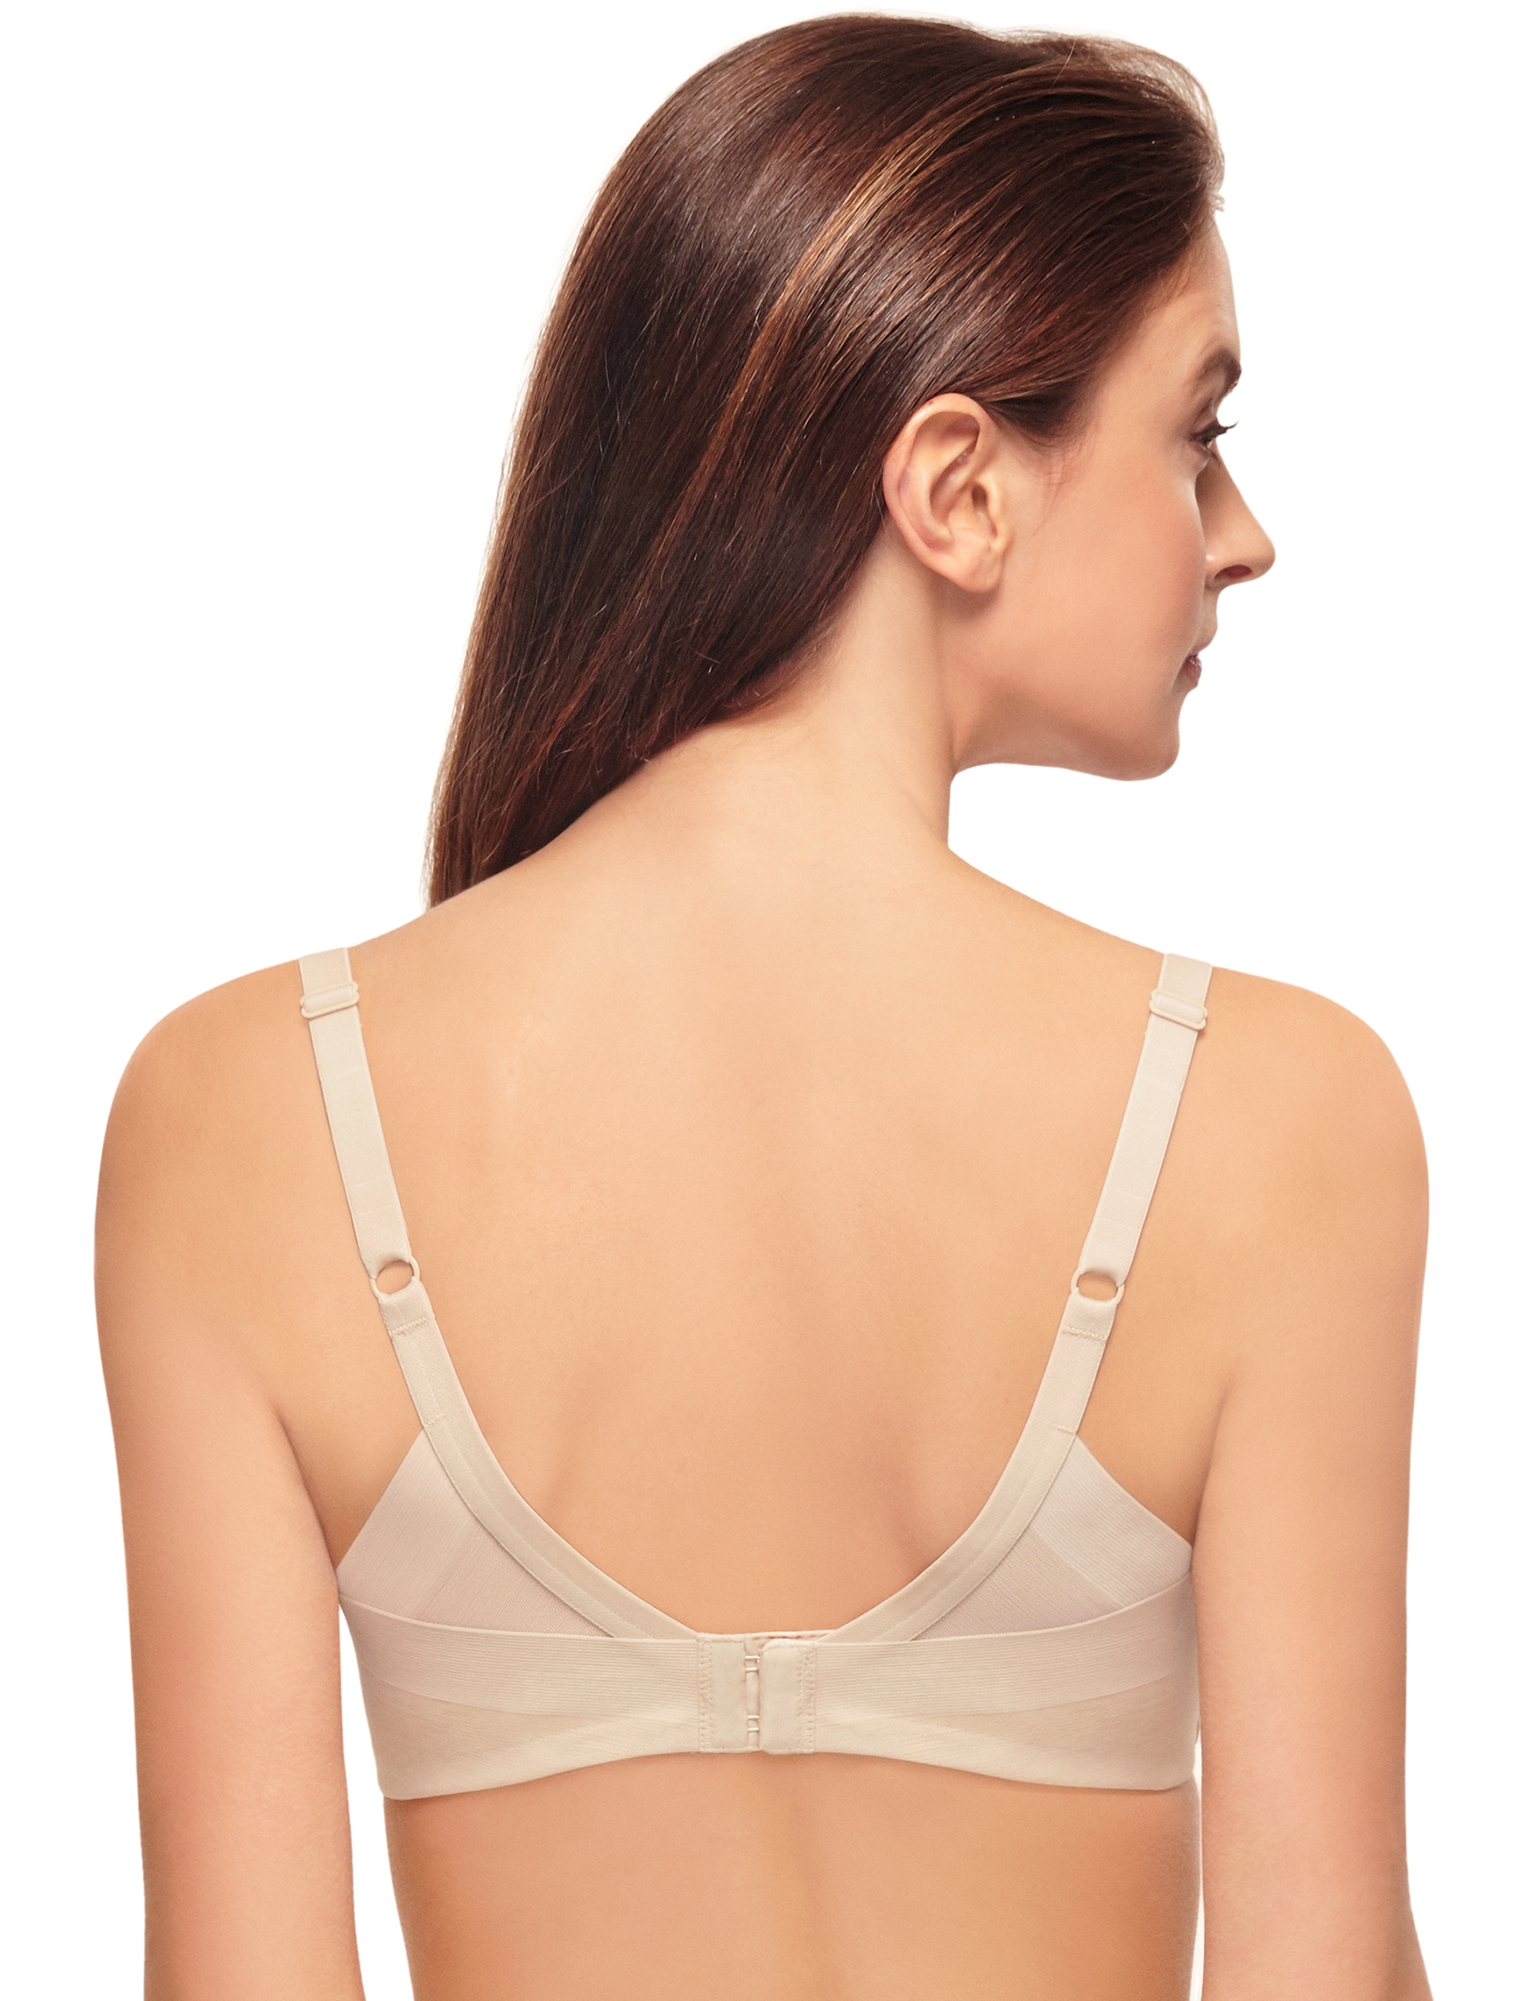 Wacoal #853281 Ultimate Side Smoother Contour Underwire Bra